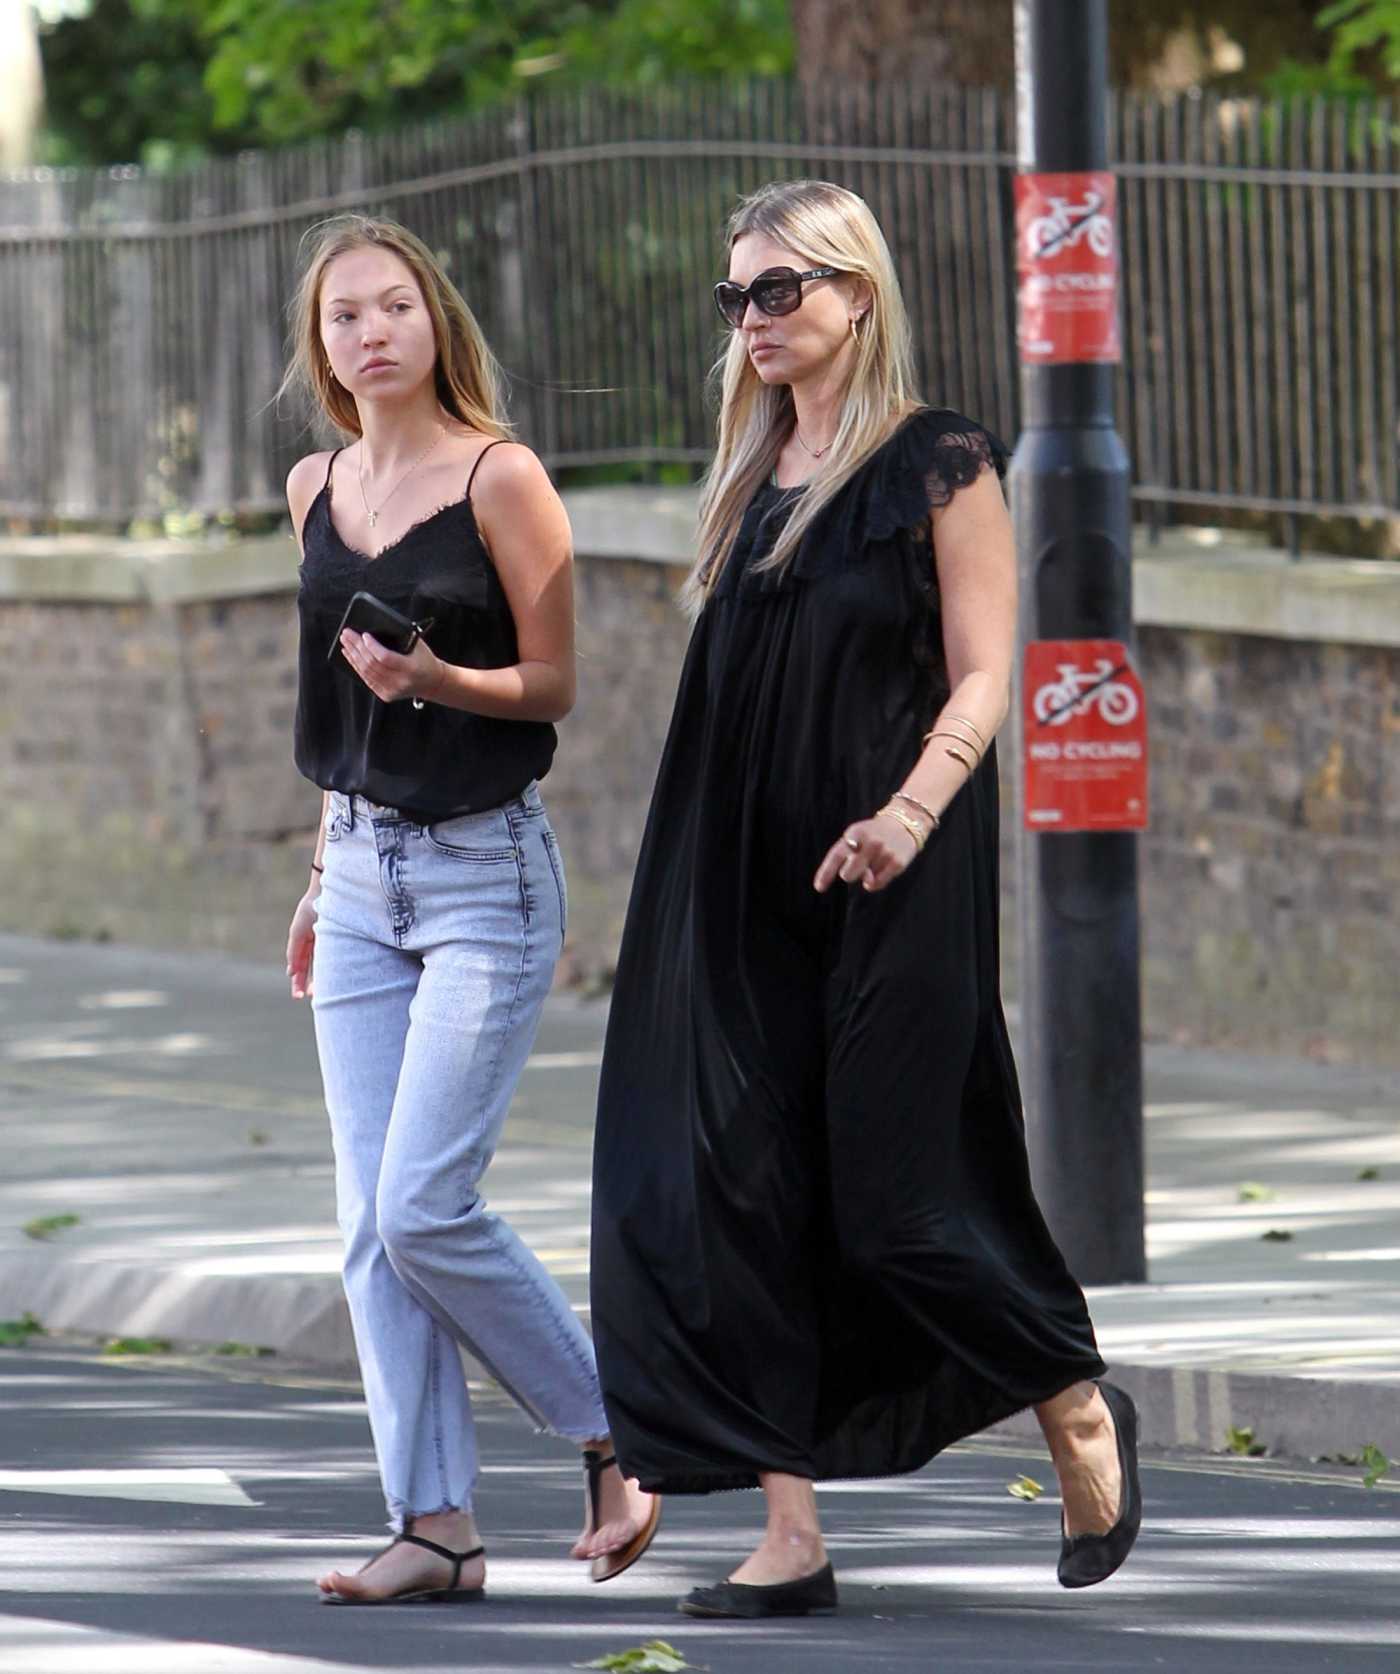 Kate Moss in a Black Dress Was Seen Out with Her Daughter Lila Grace Moss in London 05/29/2020